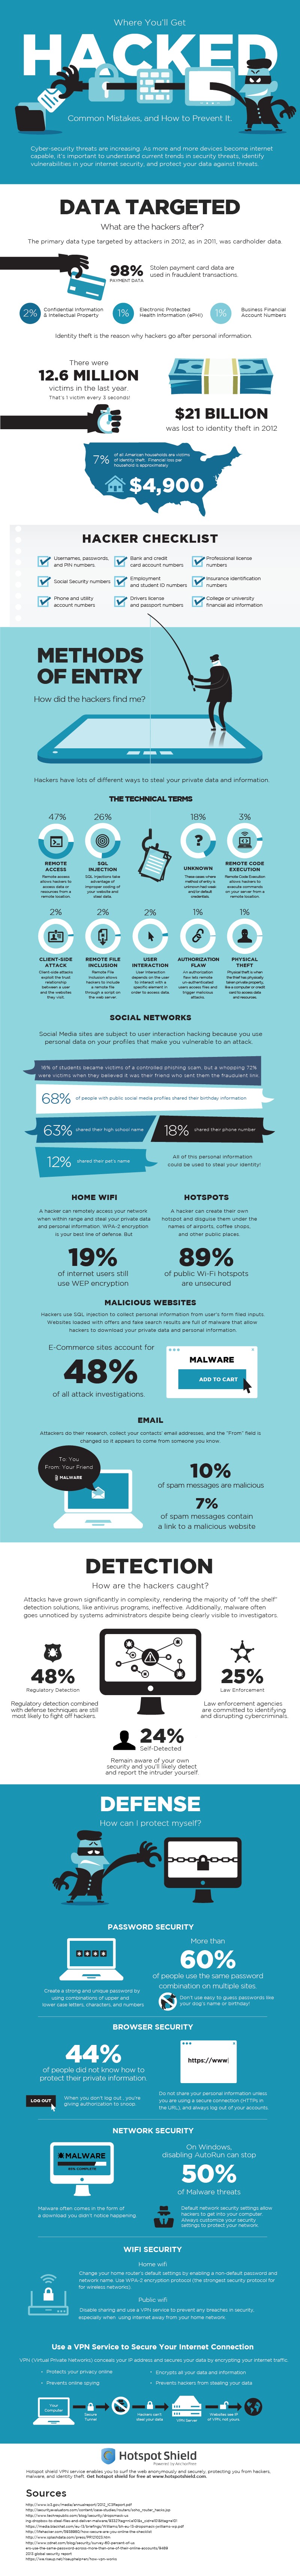 how_to_prevent_being_hacked_infographic